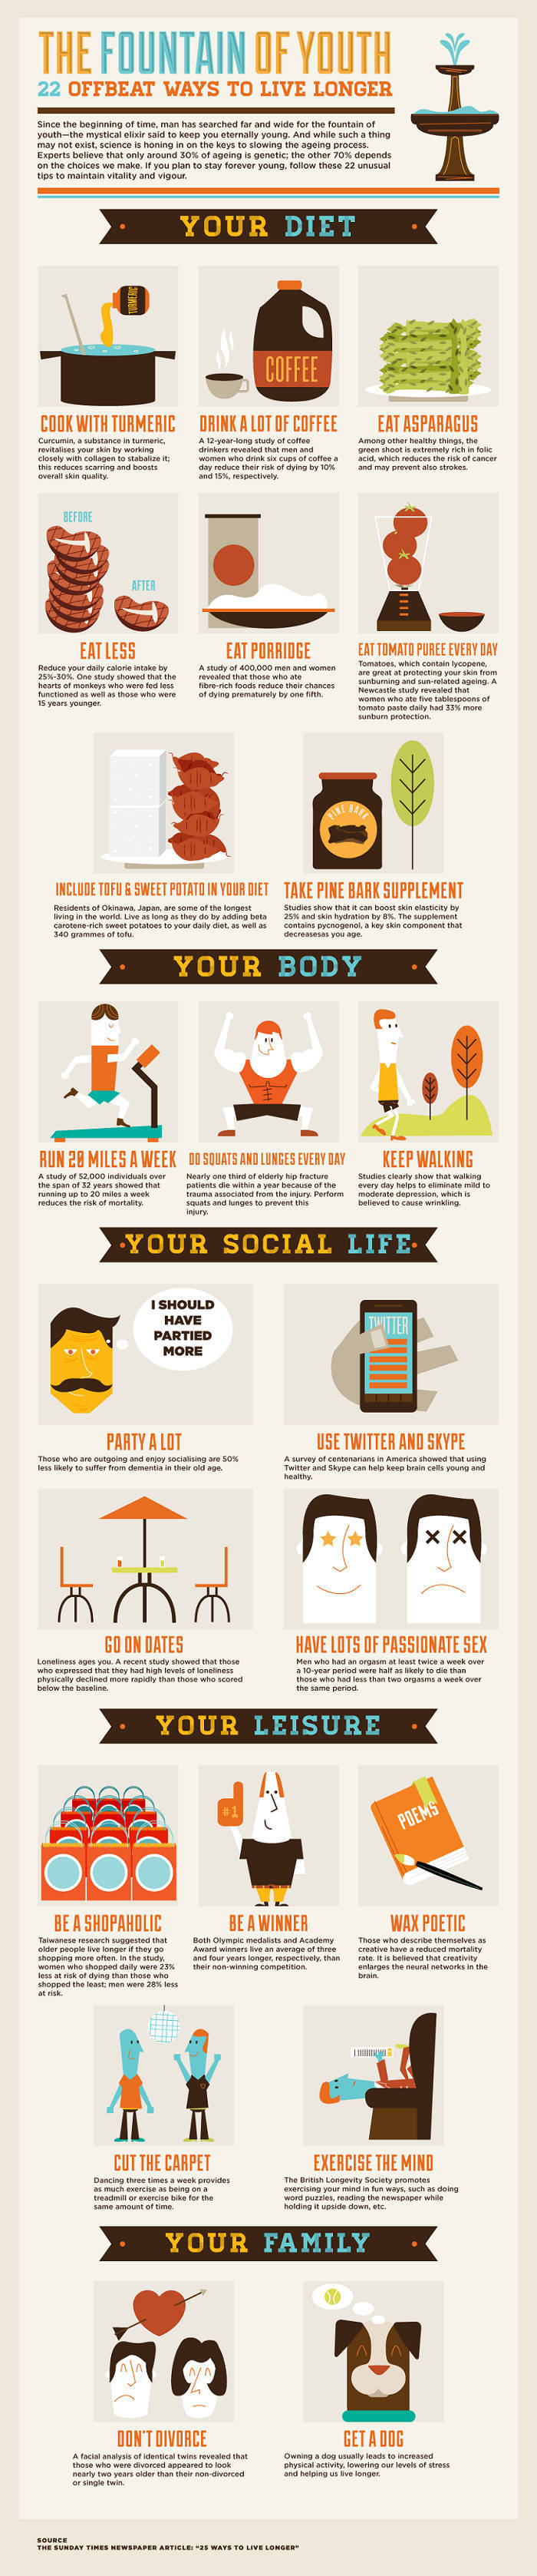 Life Hacks for a Longer Life - Infographic